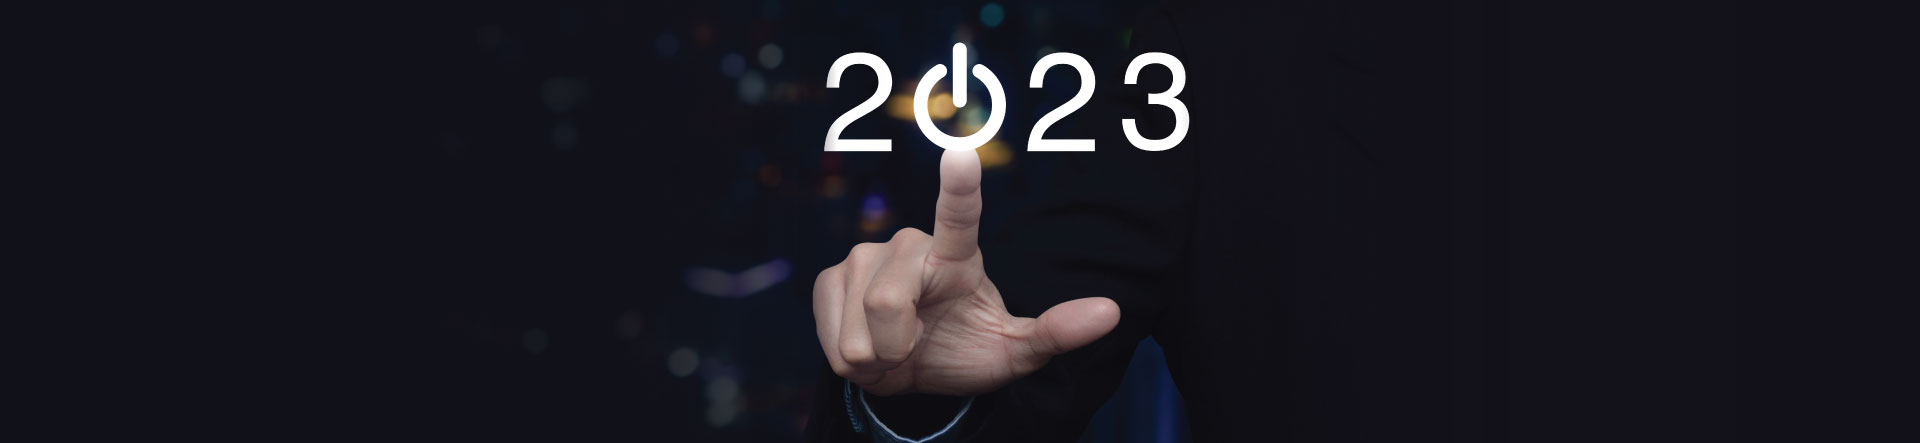 IT Health Hacks 2023 - finger pointing to 2023